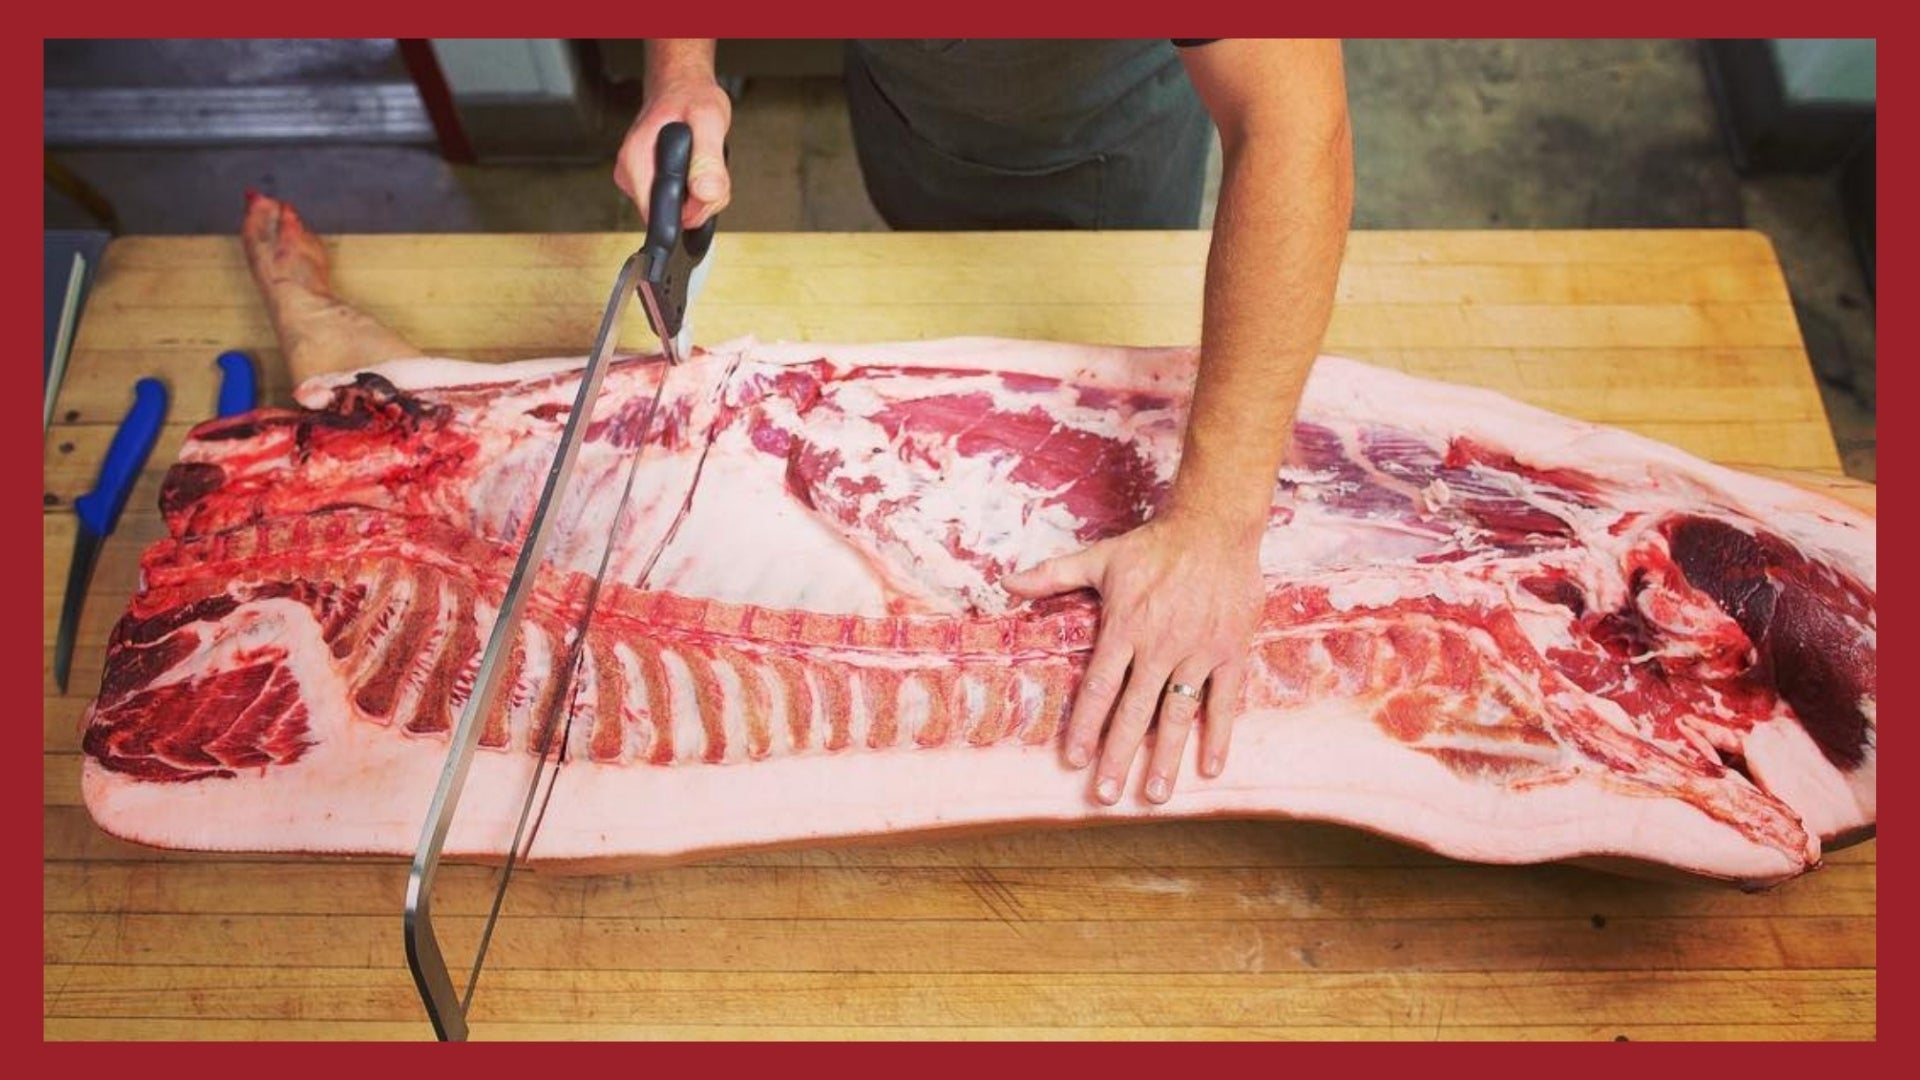 A half a pig on a butchers table being butchered into primal cuts with a hand saw.